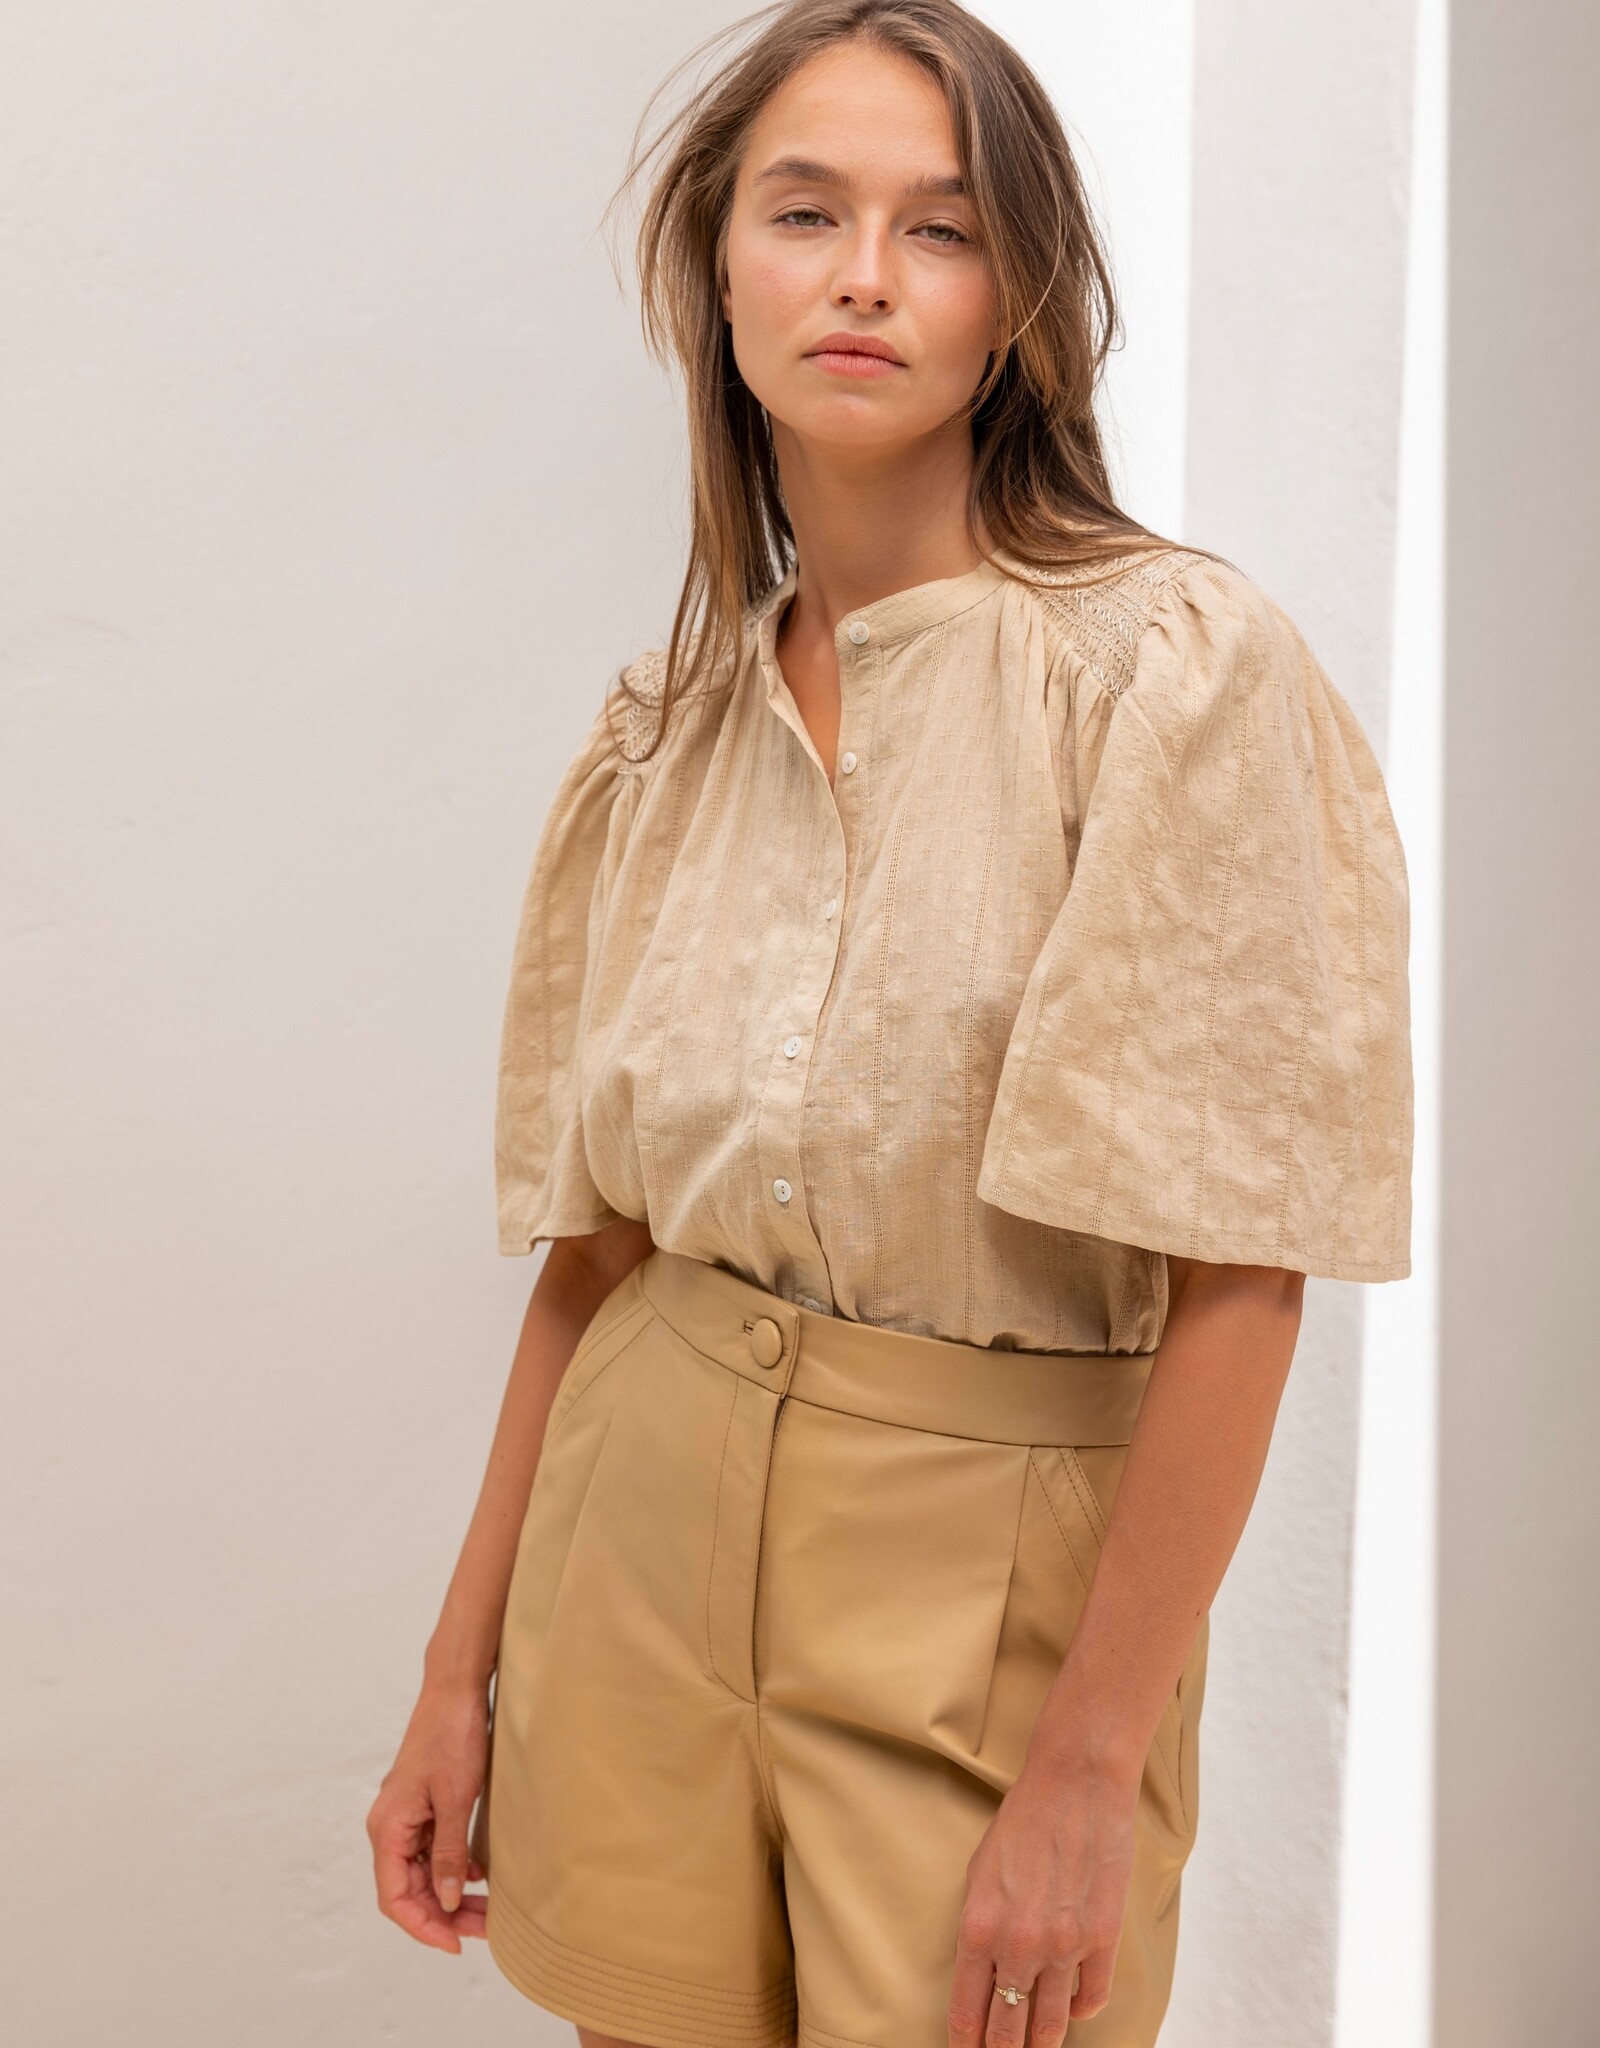 Ruby Tuesday SAFIR blouse with half sleeves and smock on shoulder Light sand